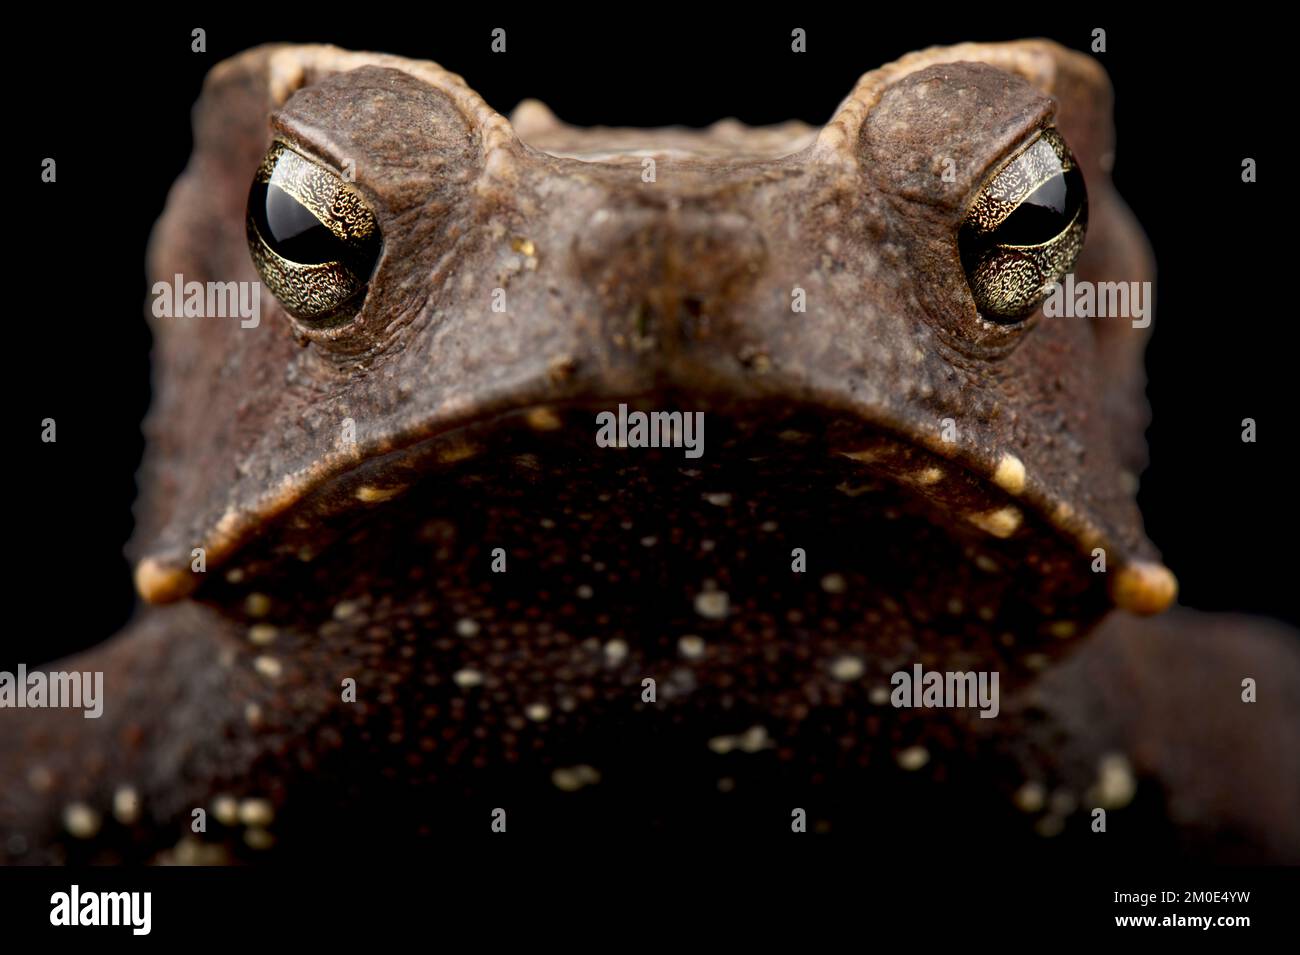 Marty's mitred toad (Rhinella martyi) Stock Photo